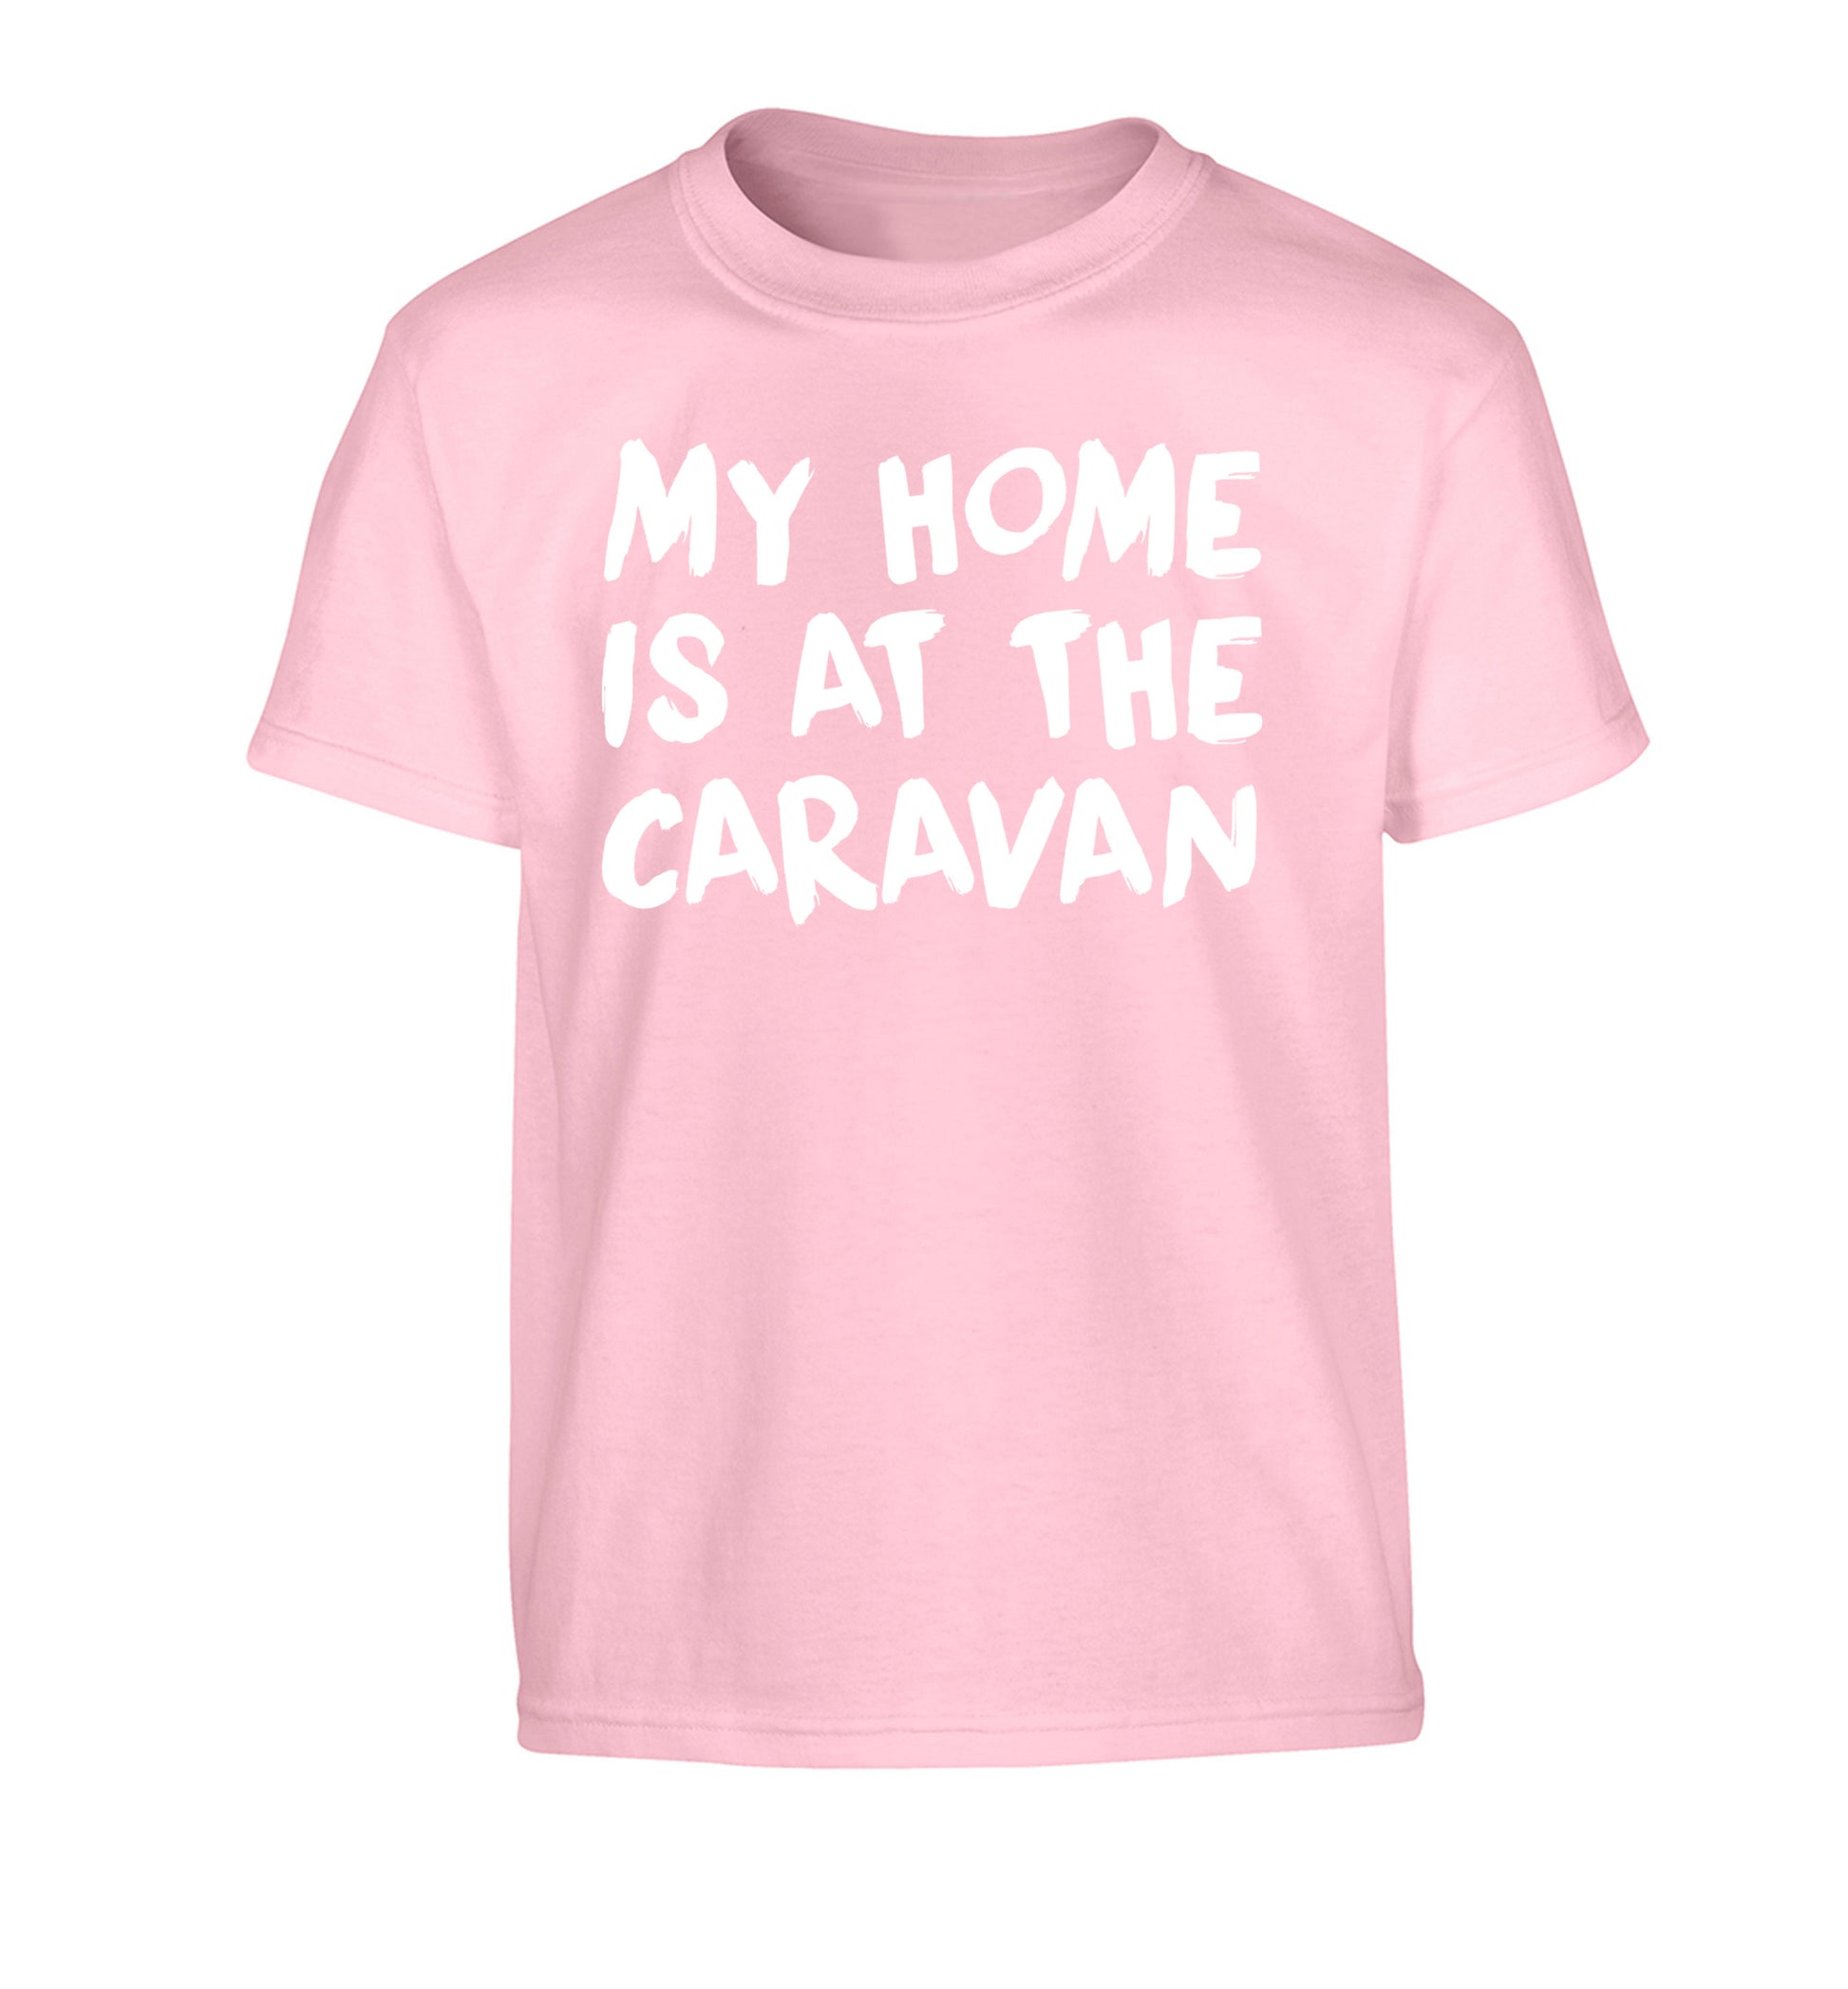 My home is at the caravan Children's light pink Tshirt 12-14 Years